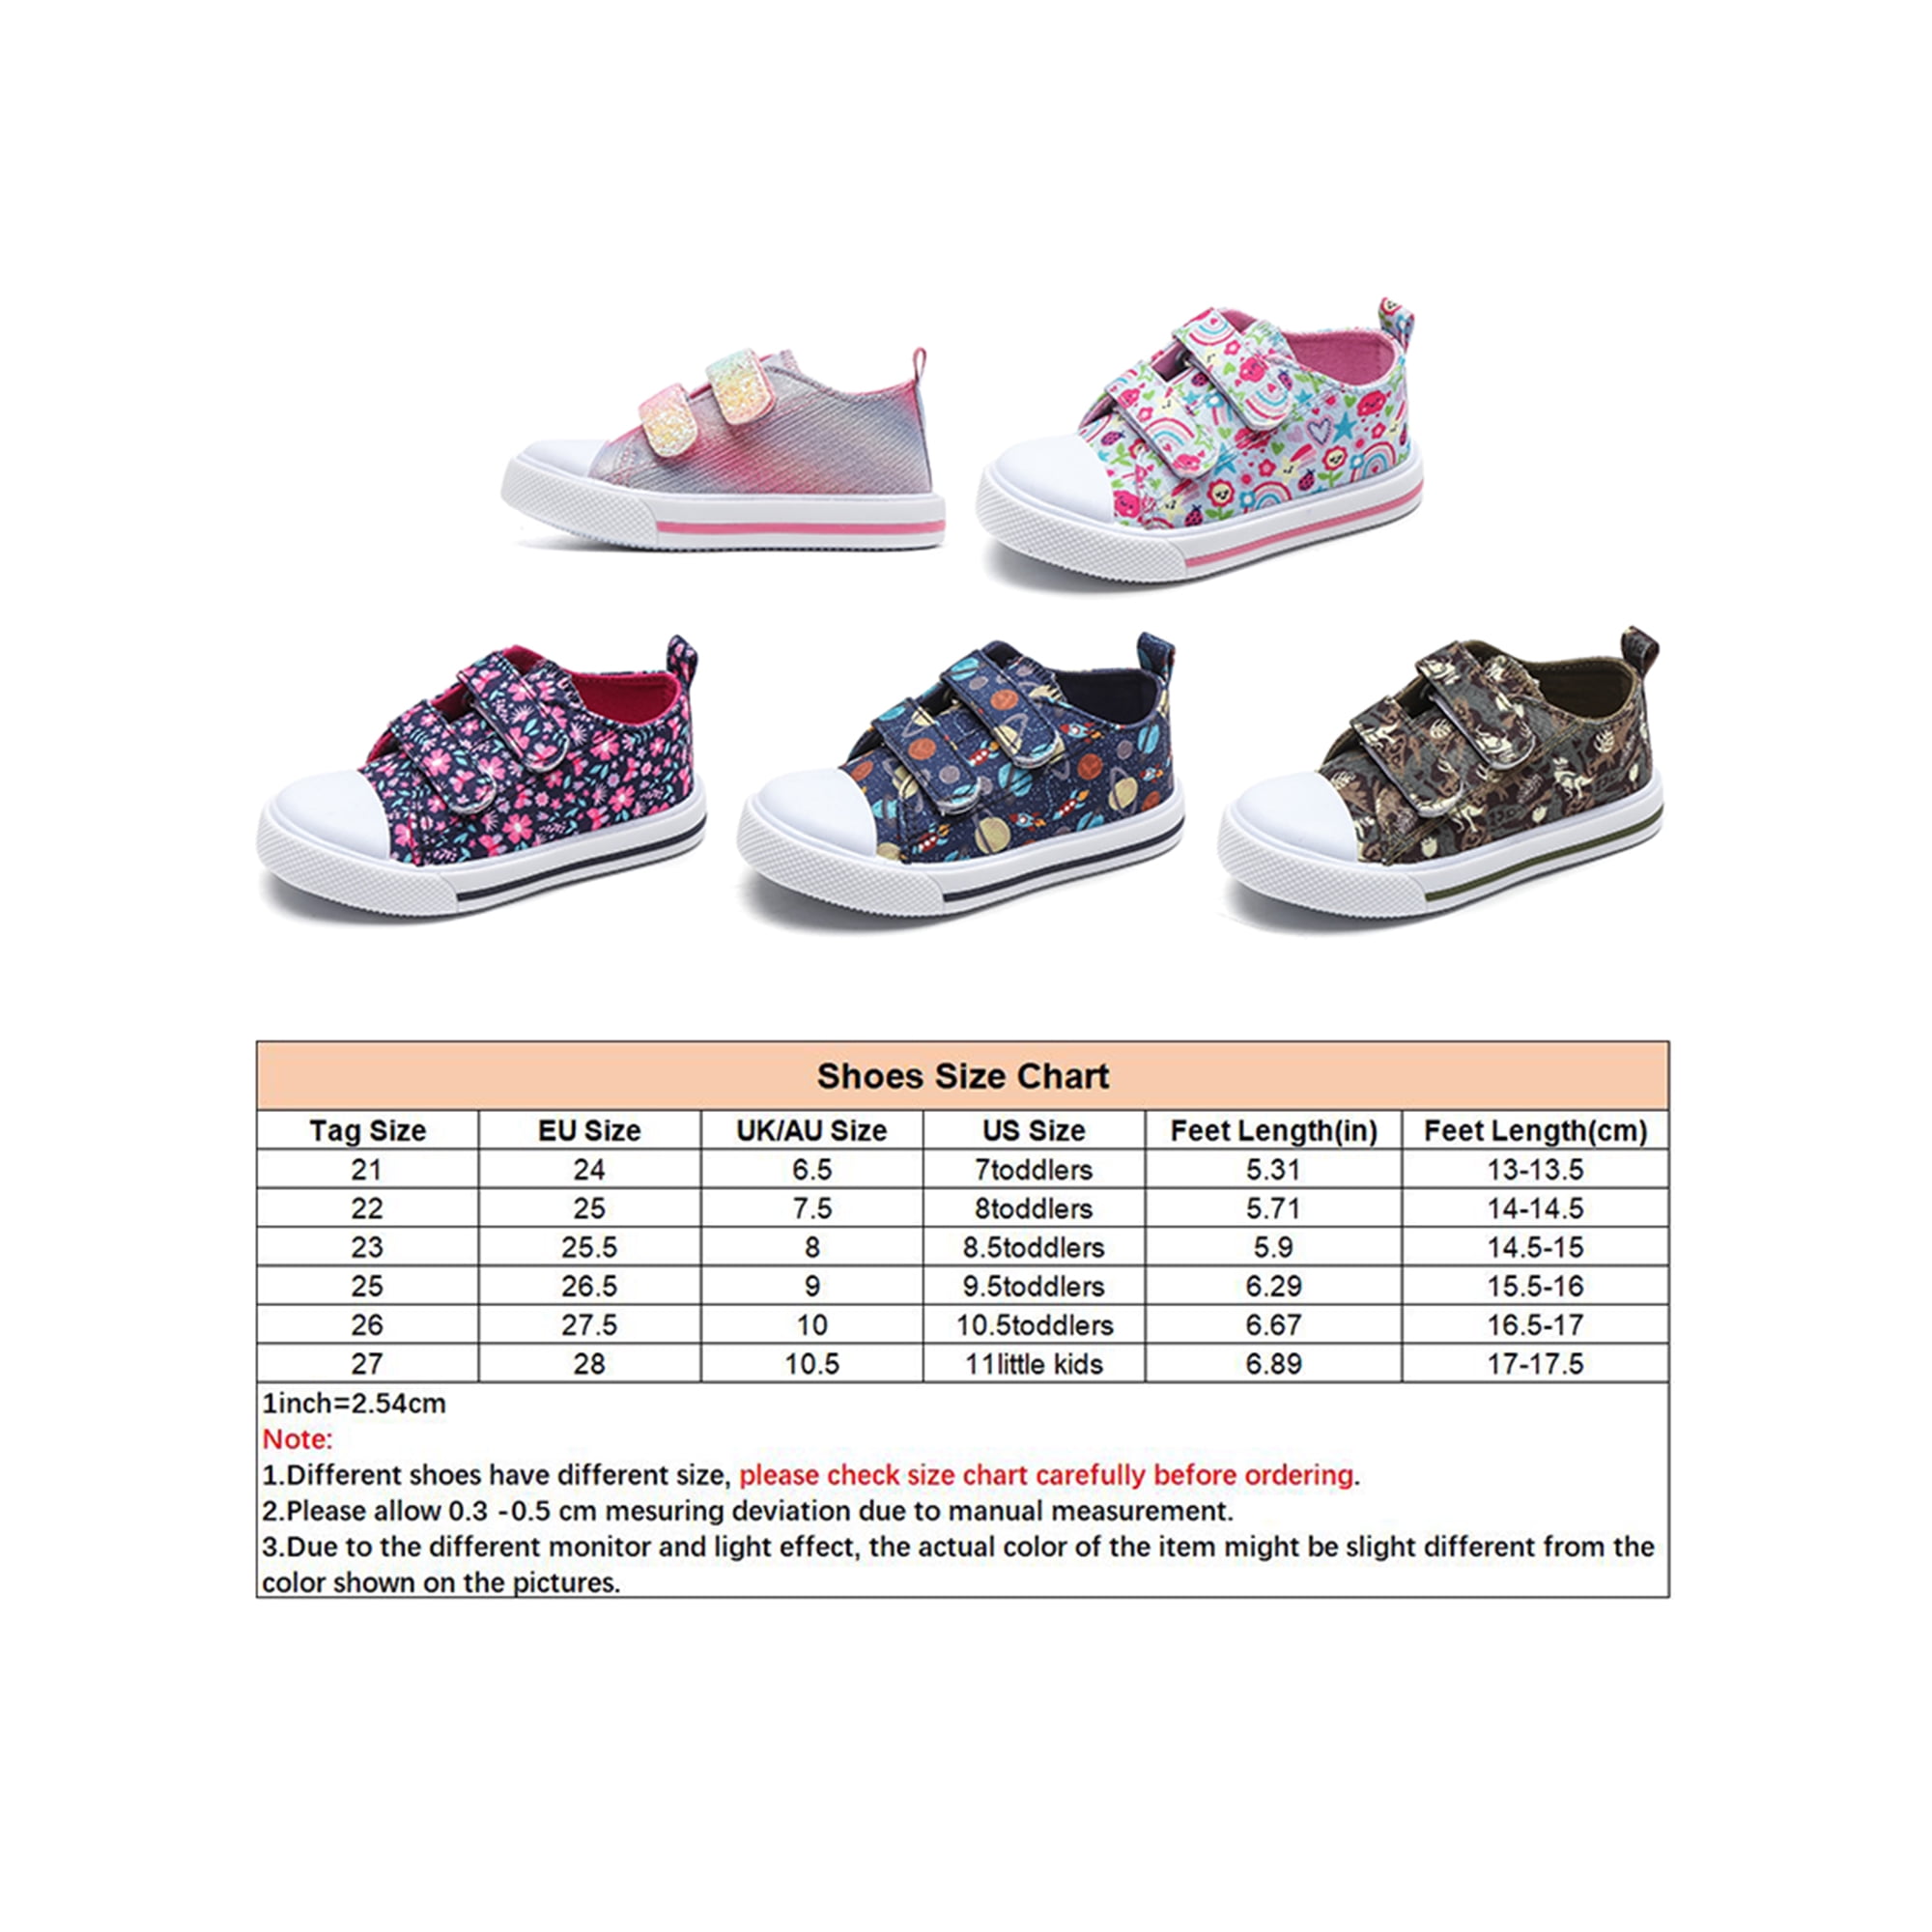 Daeful Kids Sneakers Comfort Casual Shoes Hook And Loop Flats School Lightweight Cute Non-Slip Canvas Shoe Rainbow 8.5toddlers -